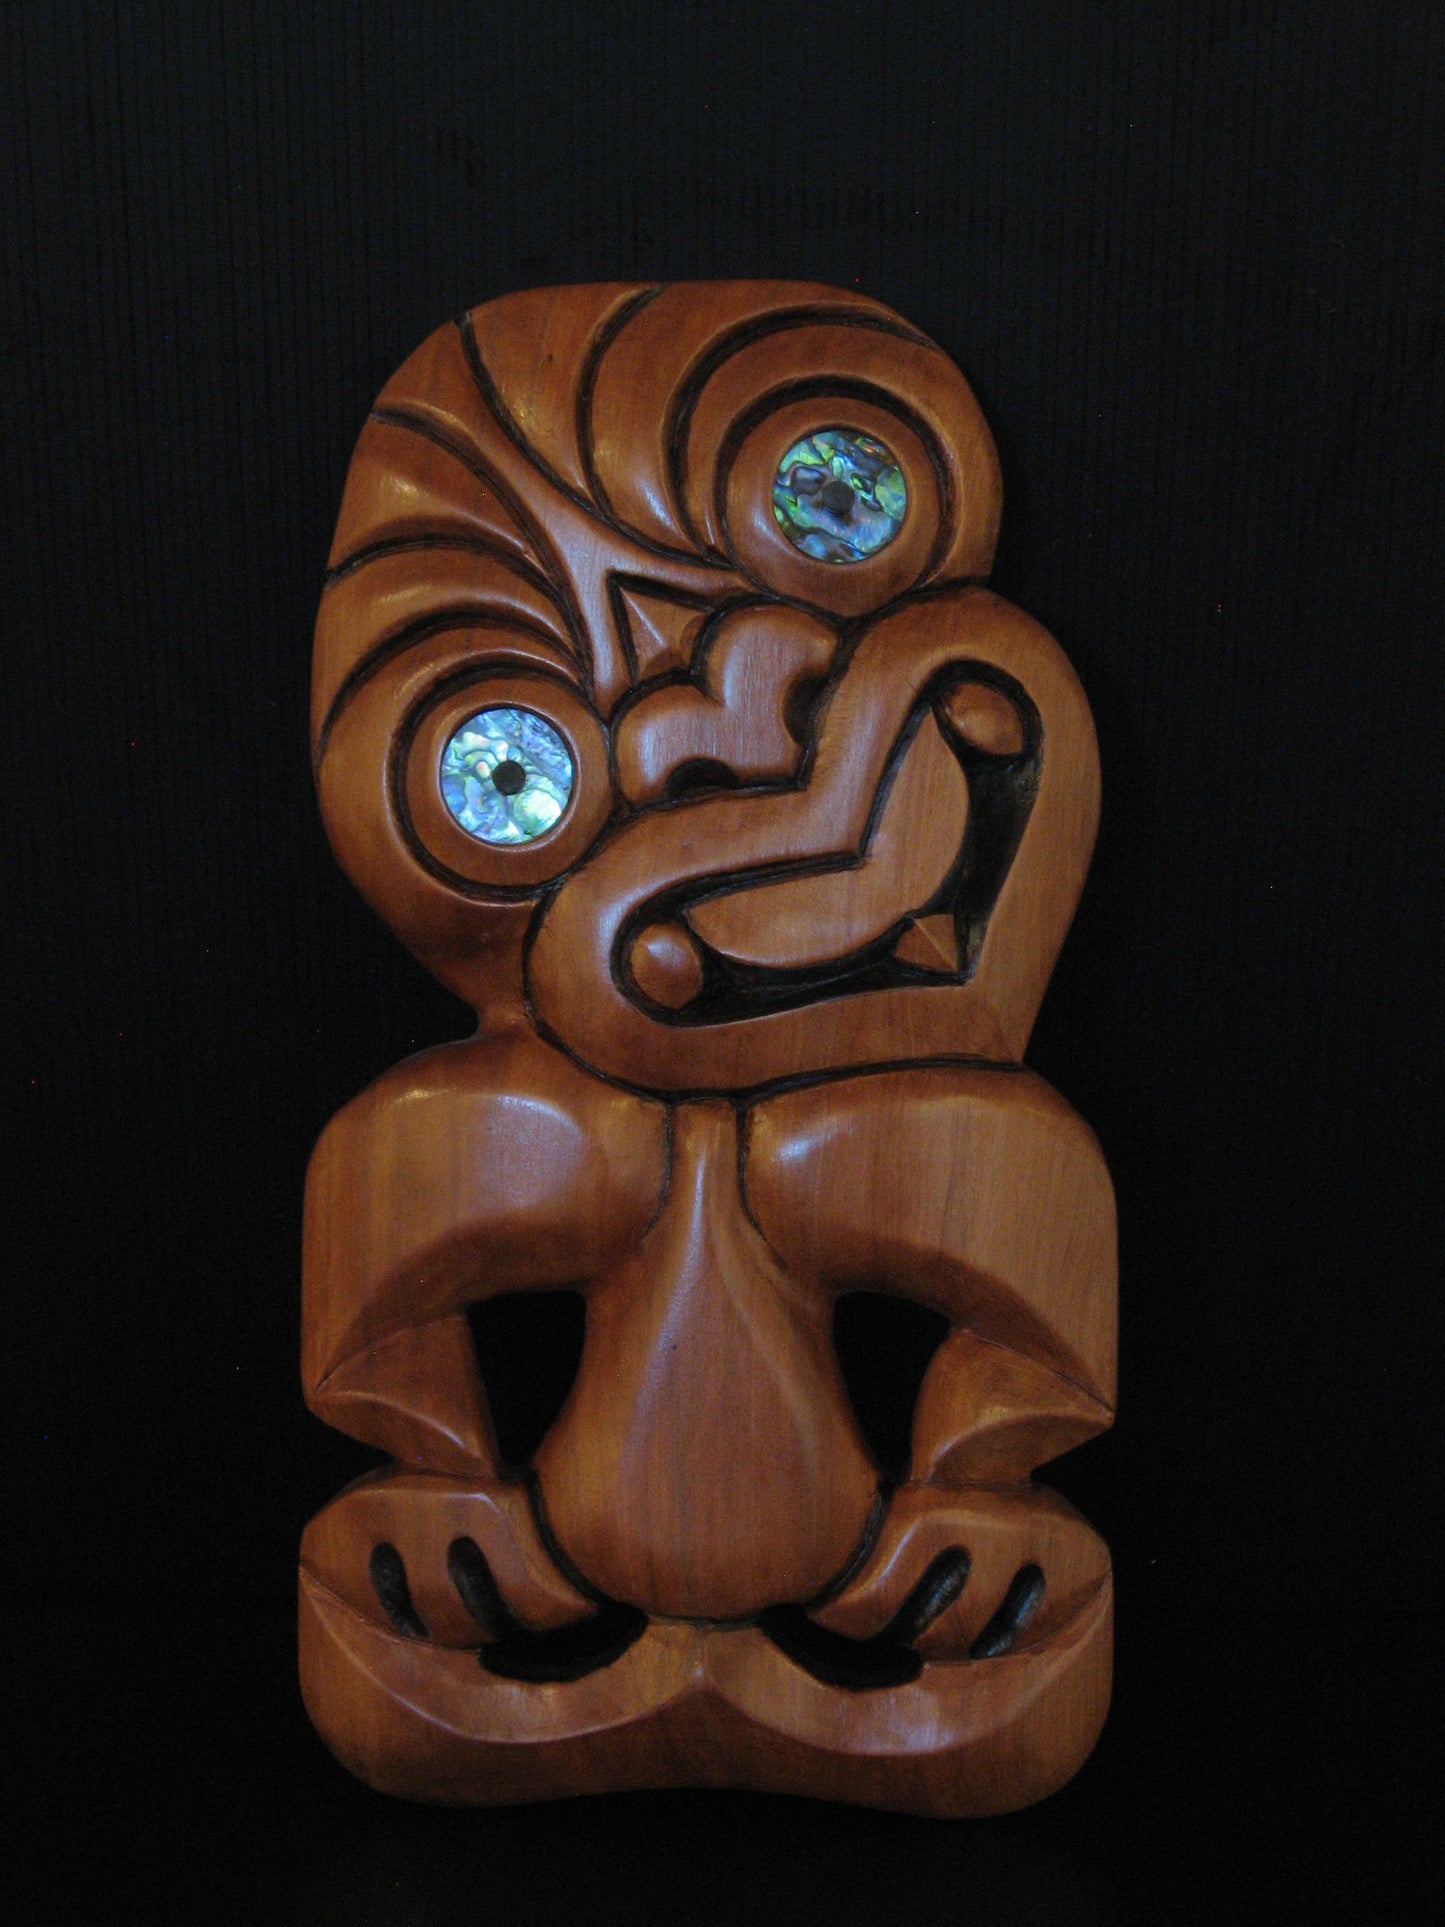 New Zealand Maori Tiki Wood Carving by Grant Holder Silver Fern Gallery